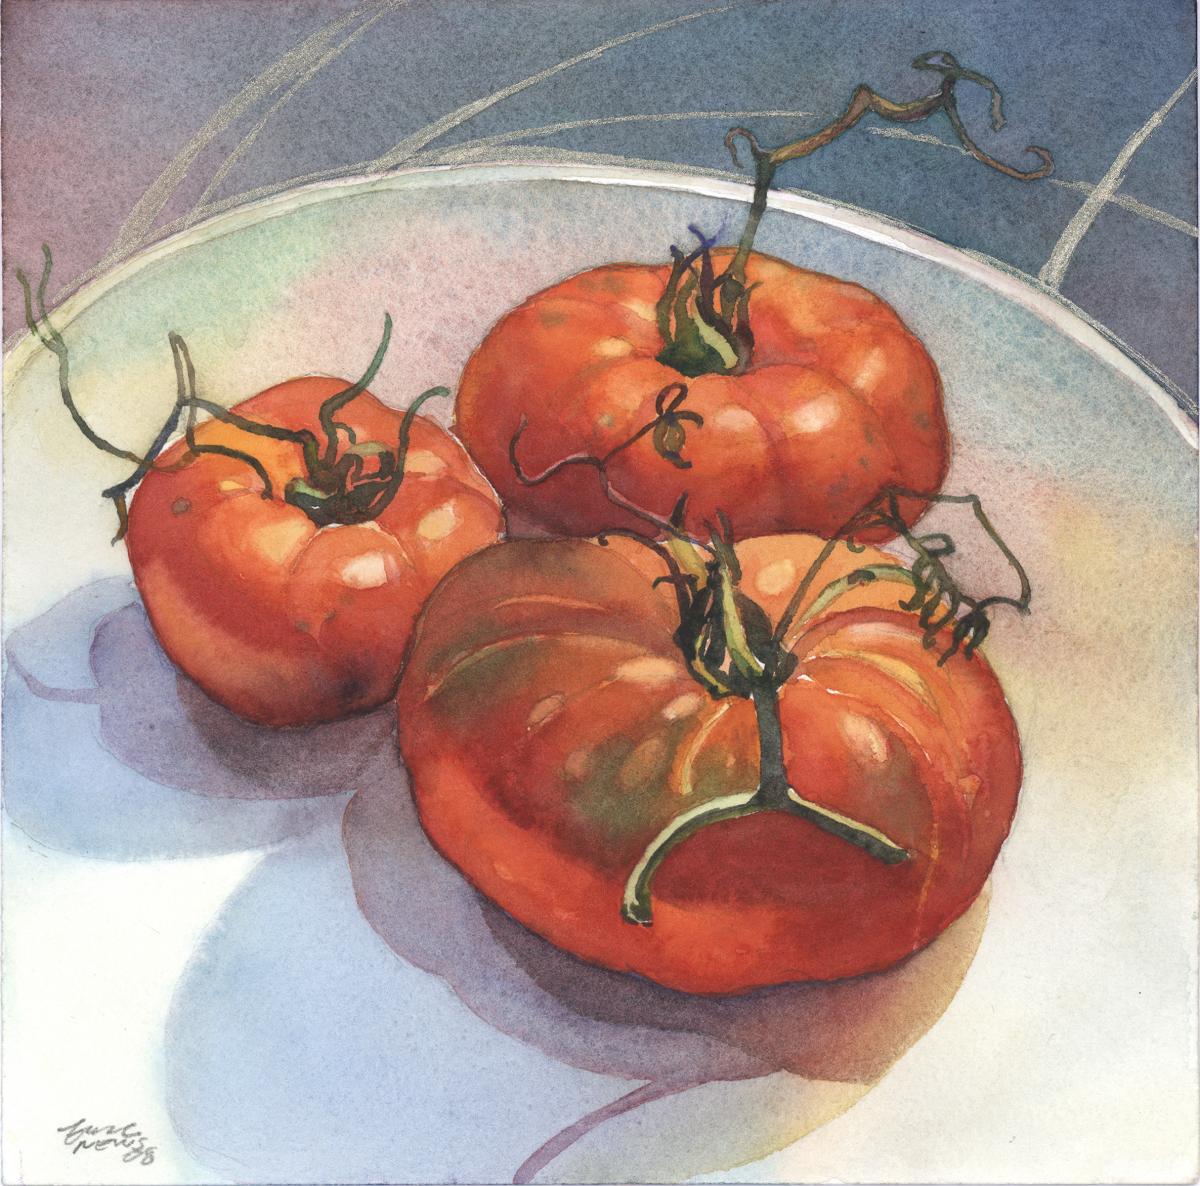 Ripening Tomato Trio - watercolor still life painting by Frank Costantino